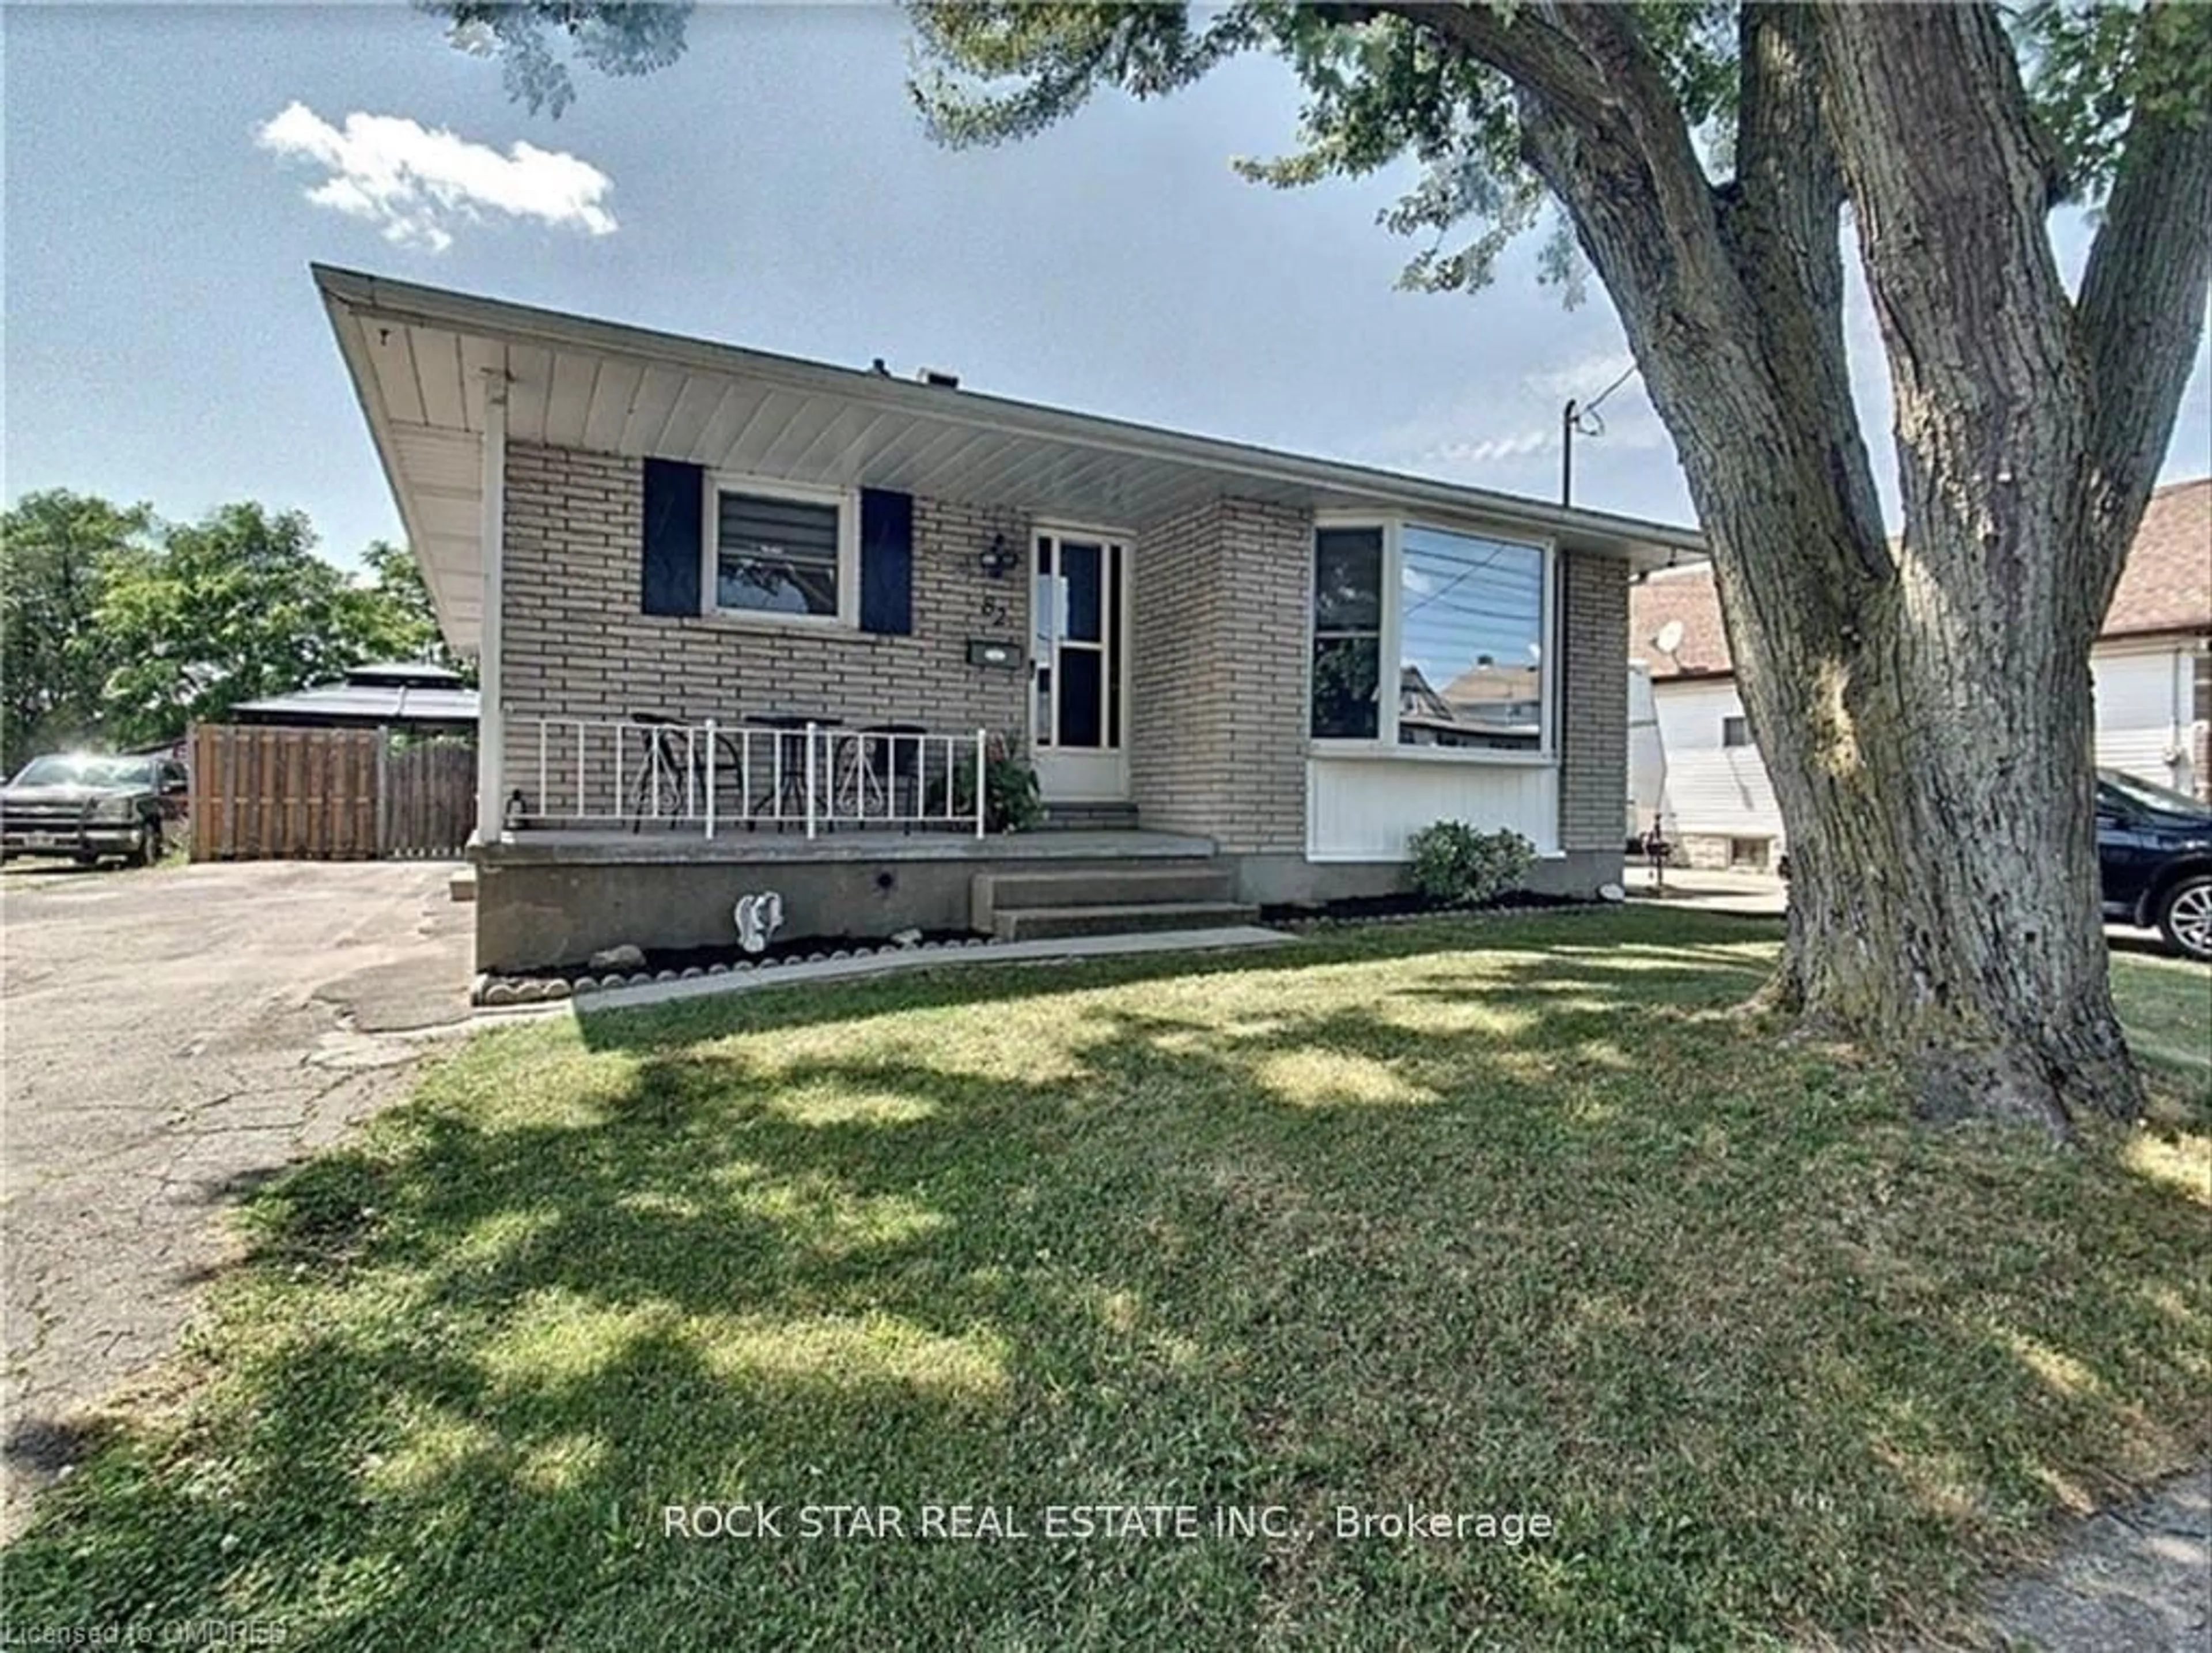 Frontside or backside of a home for 82 Deere St, Welland Ontario L3B 2L8